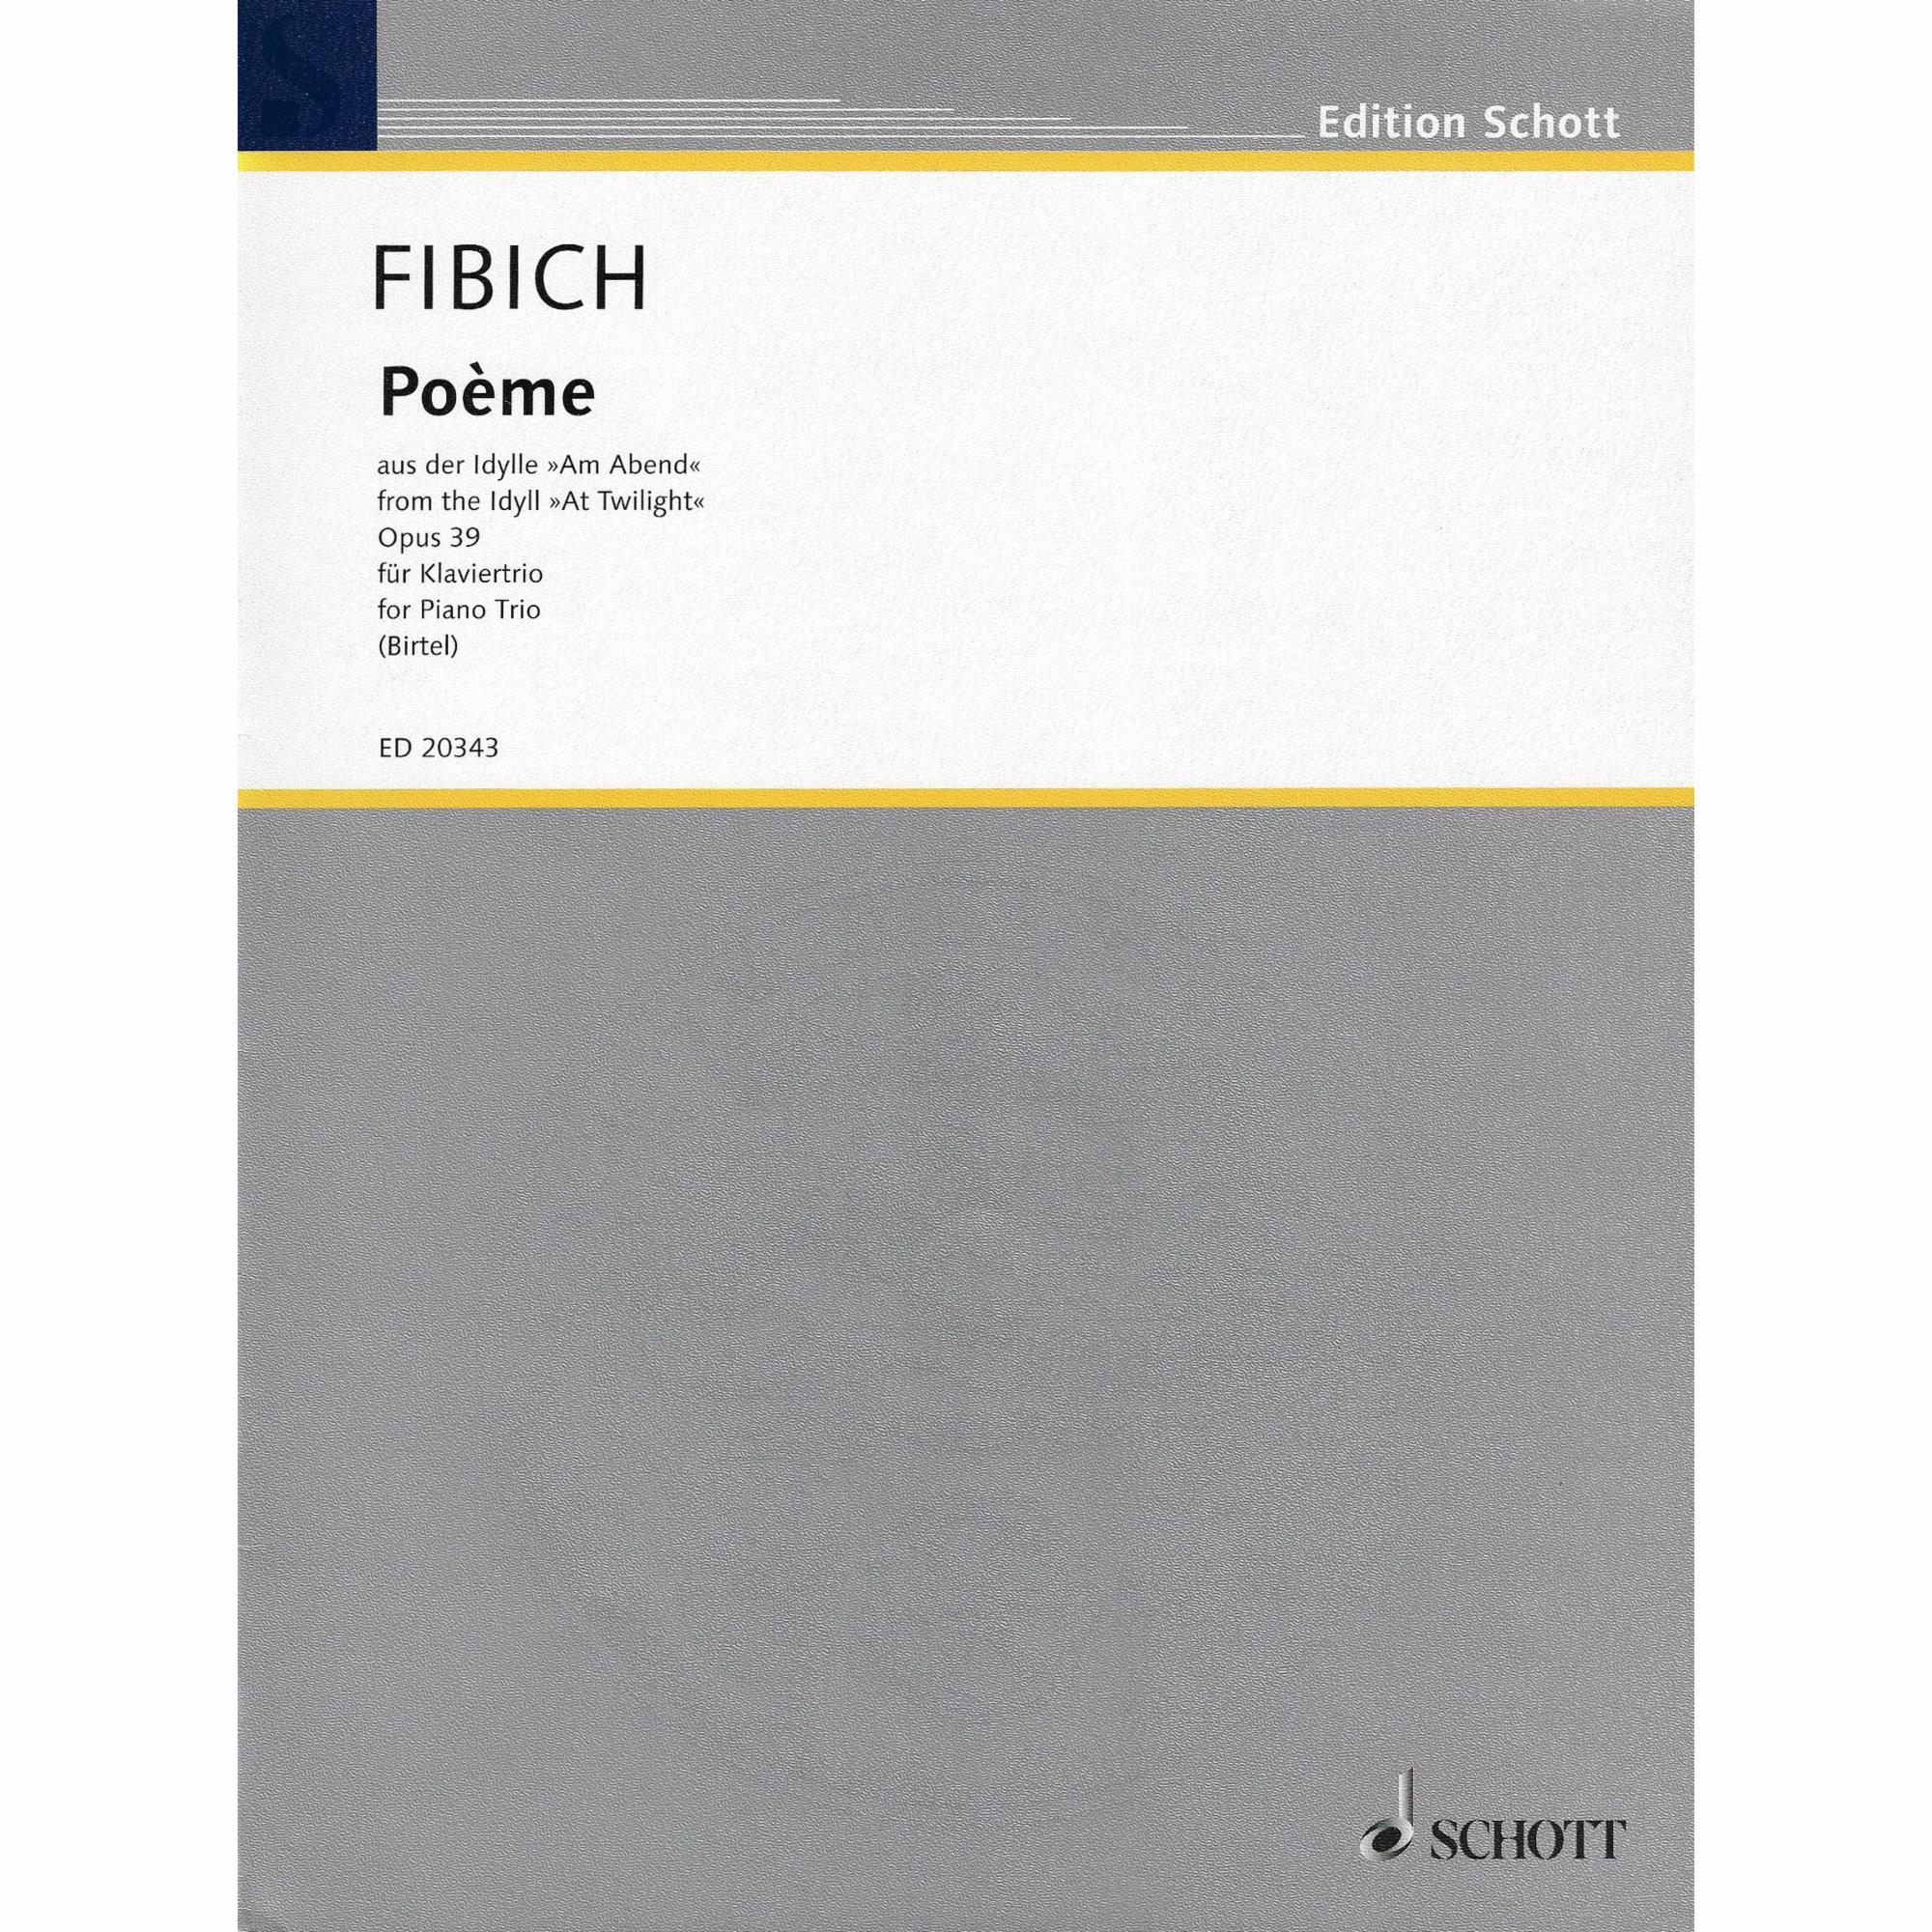 Fibich -- Poeme, from At Twilight, Op. 39